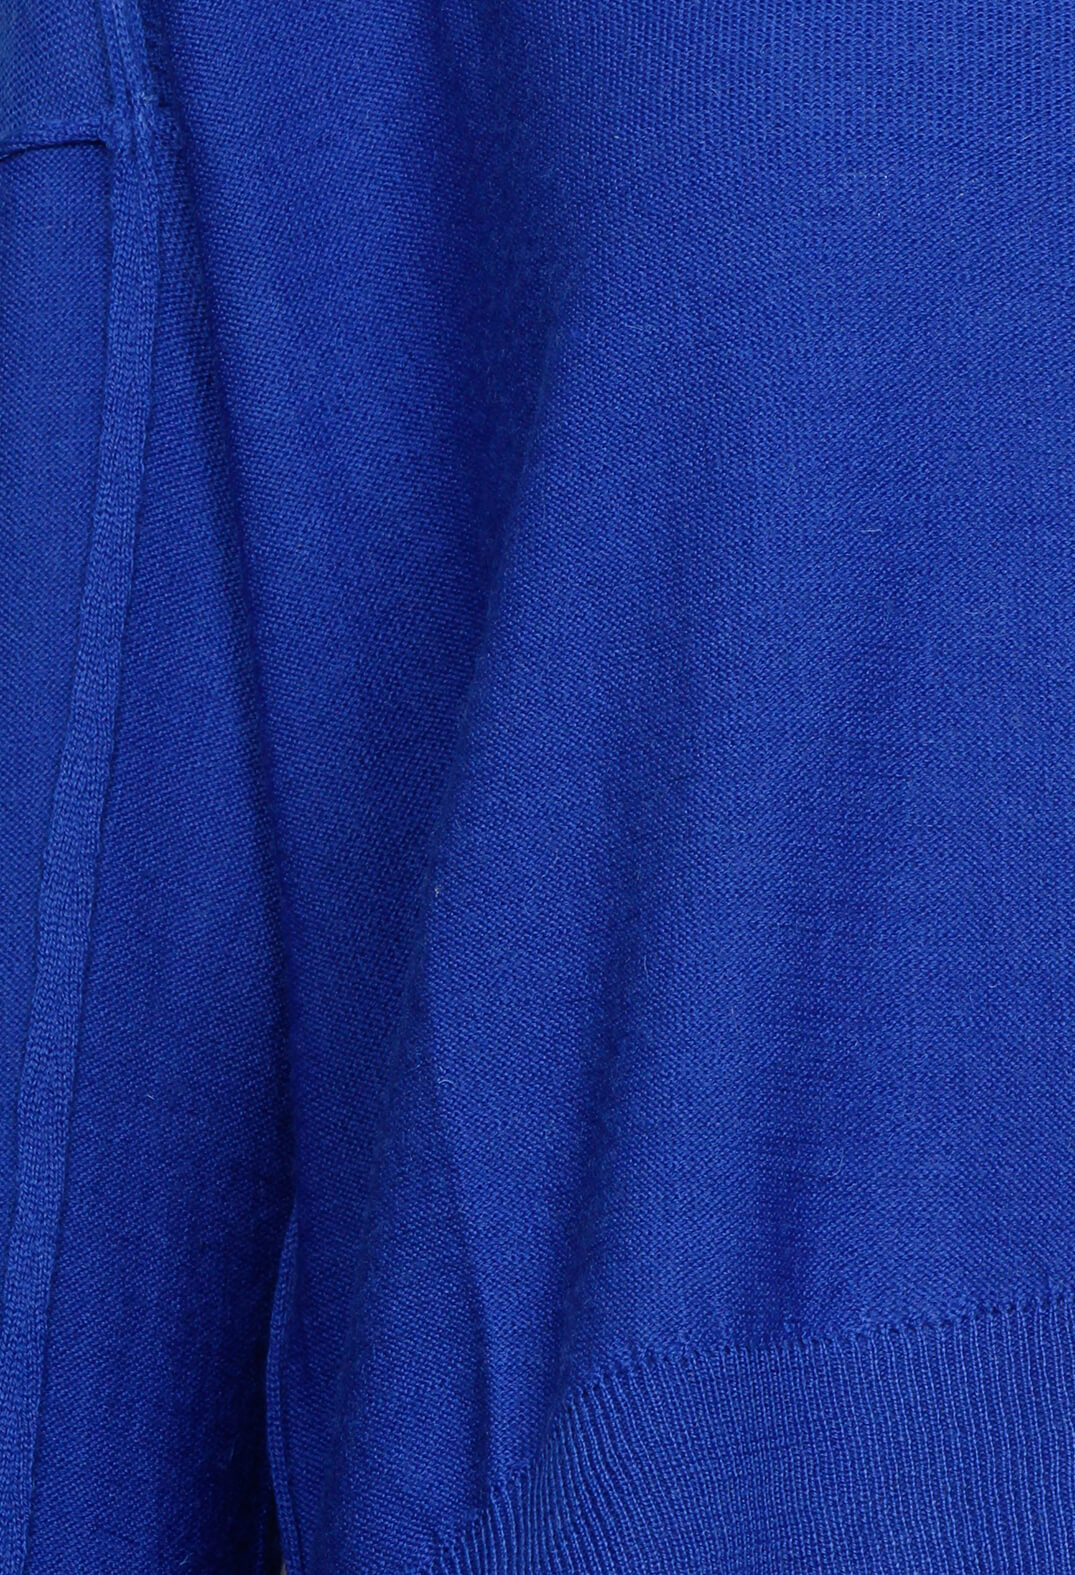 High Neck Sweater with Seam Detail in Royal Blue